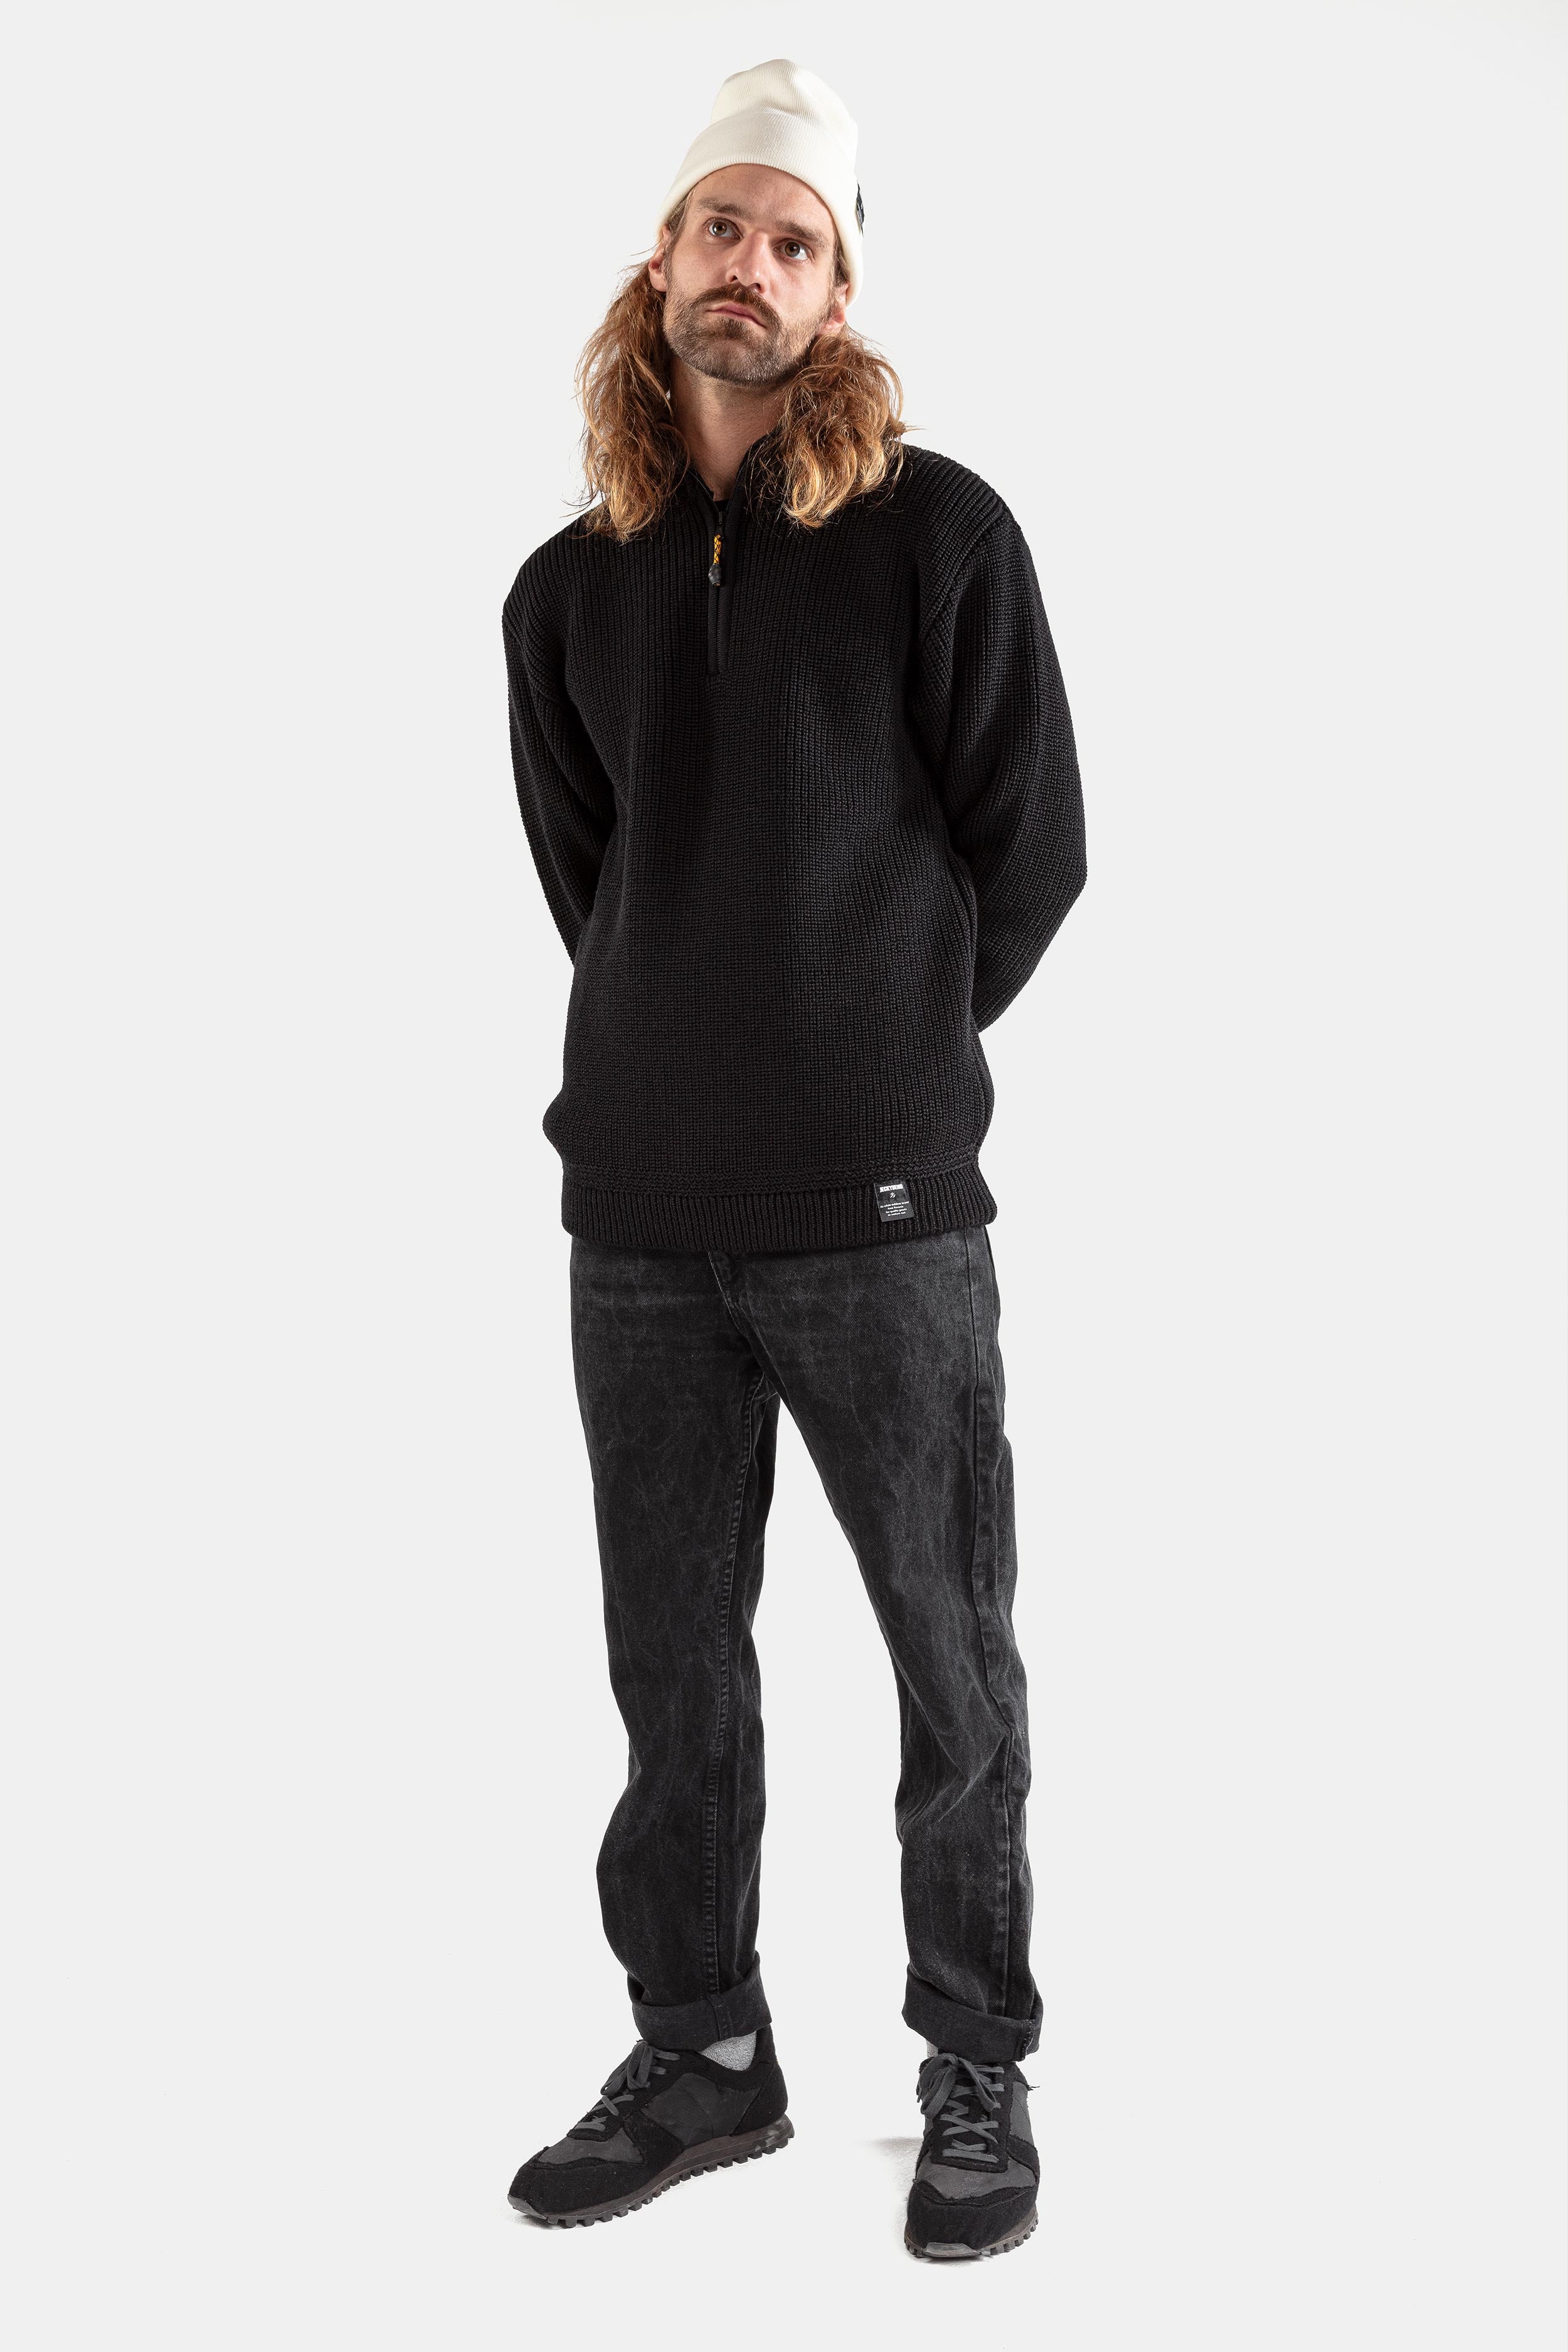 JECKYBENG-The-MERINO-TROYER-08 black